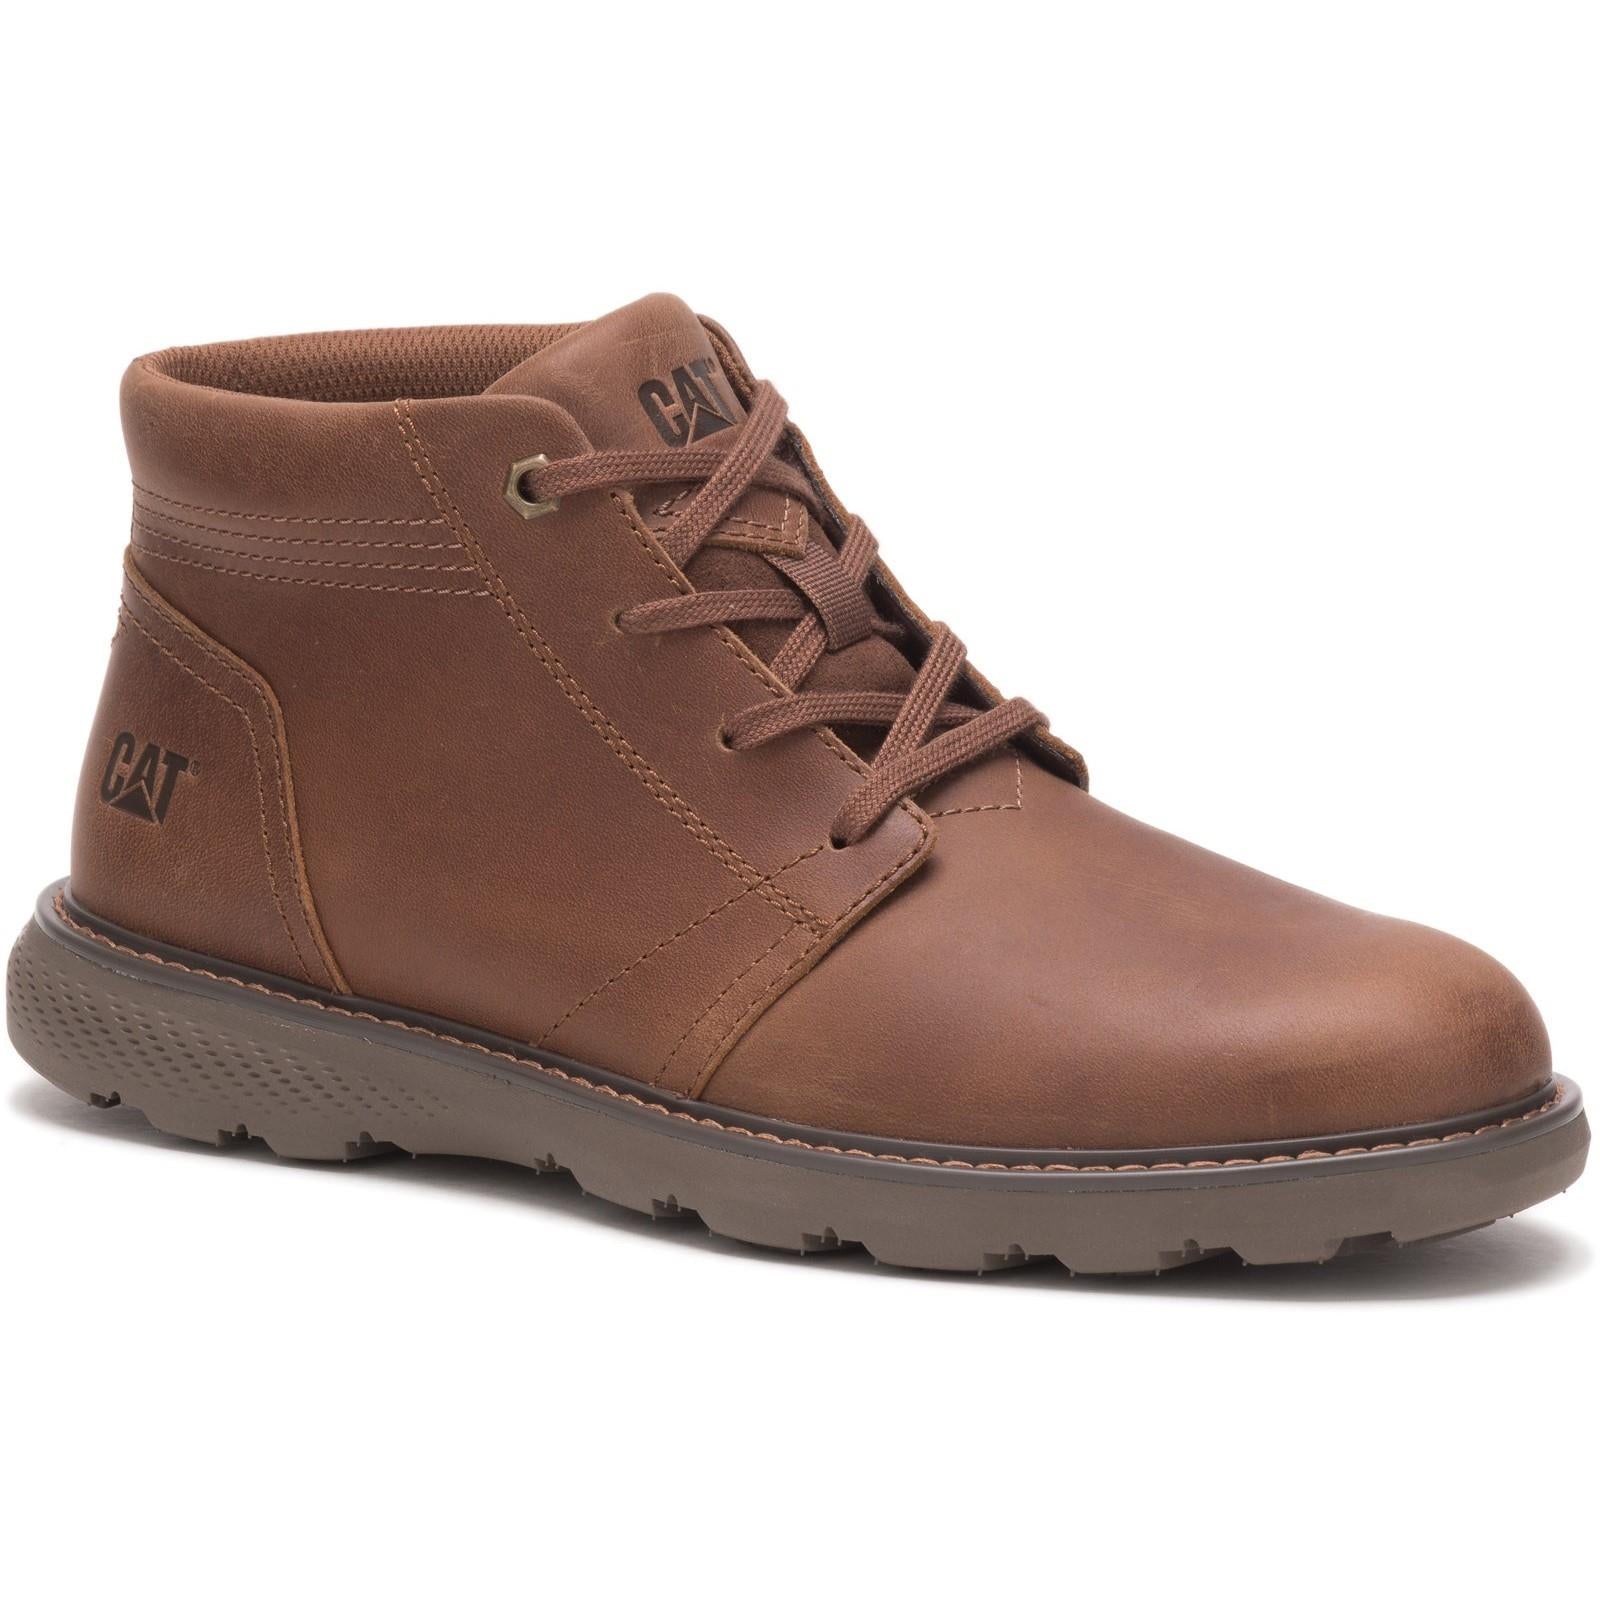 Caterpillar CAT Lifestyle Trey 2.0 cashew brown nubuck leather lace up boots